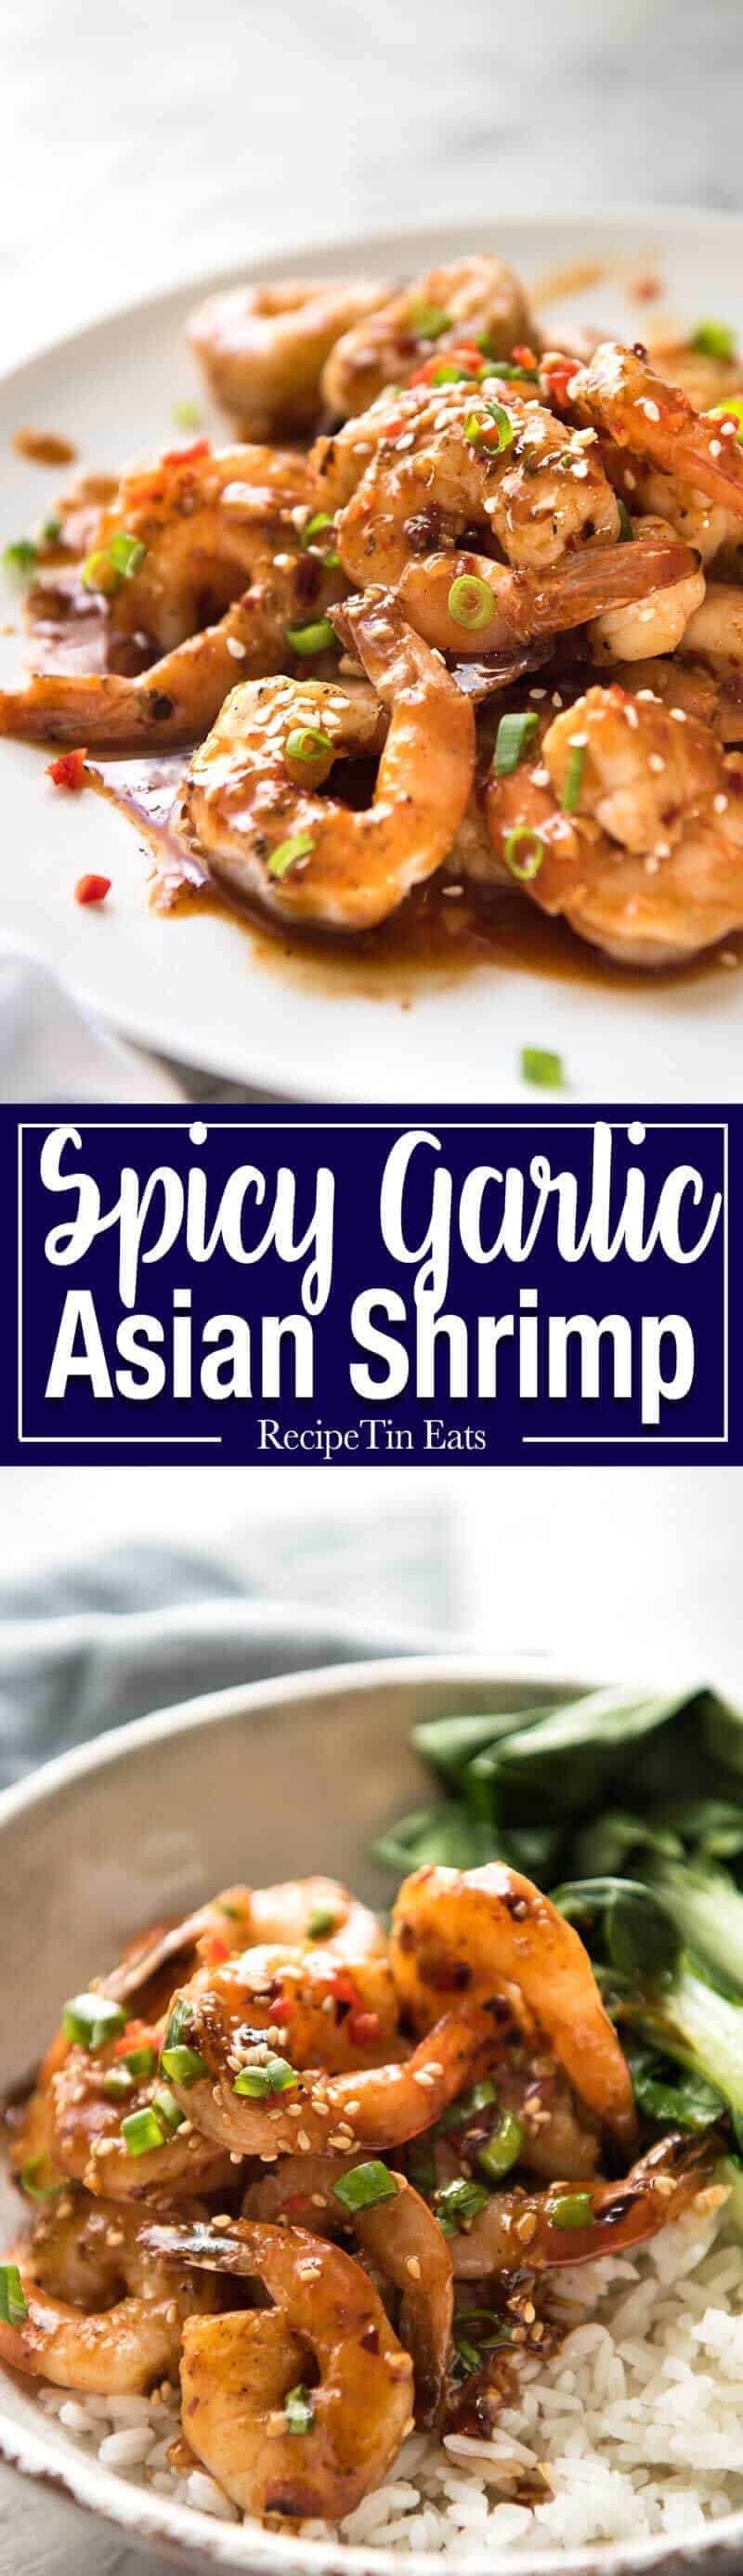 Asian Chilli Garlic Prawns - Juicy prawns in a sweet, sticky, spicy, garlicky sauce. Dinner on the table in 10 minutes! www.recipetineats.com